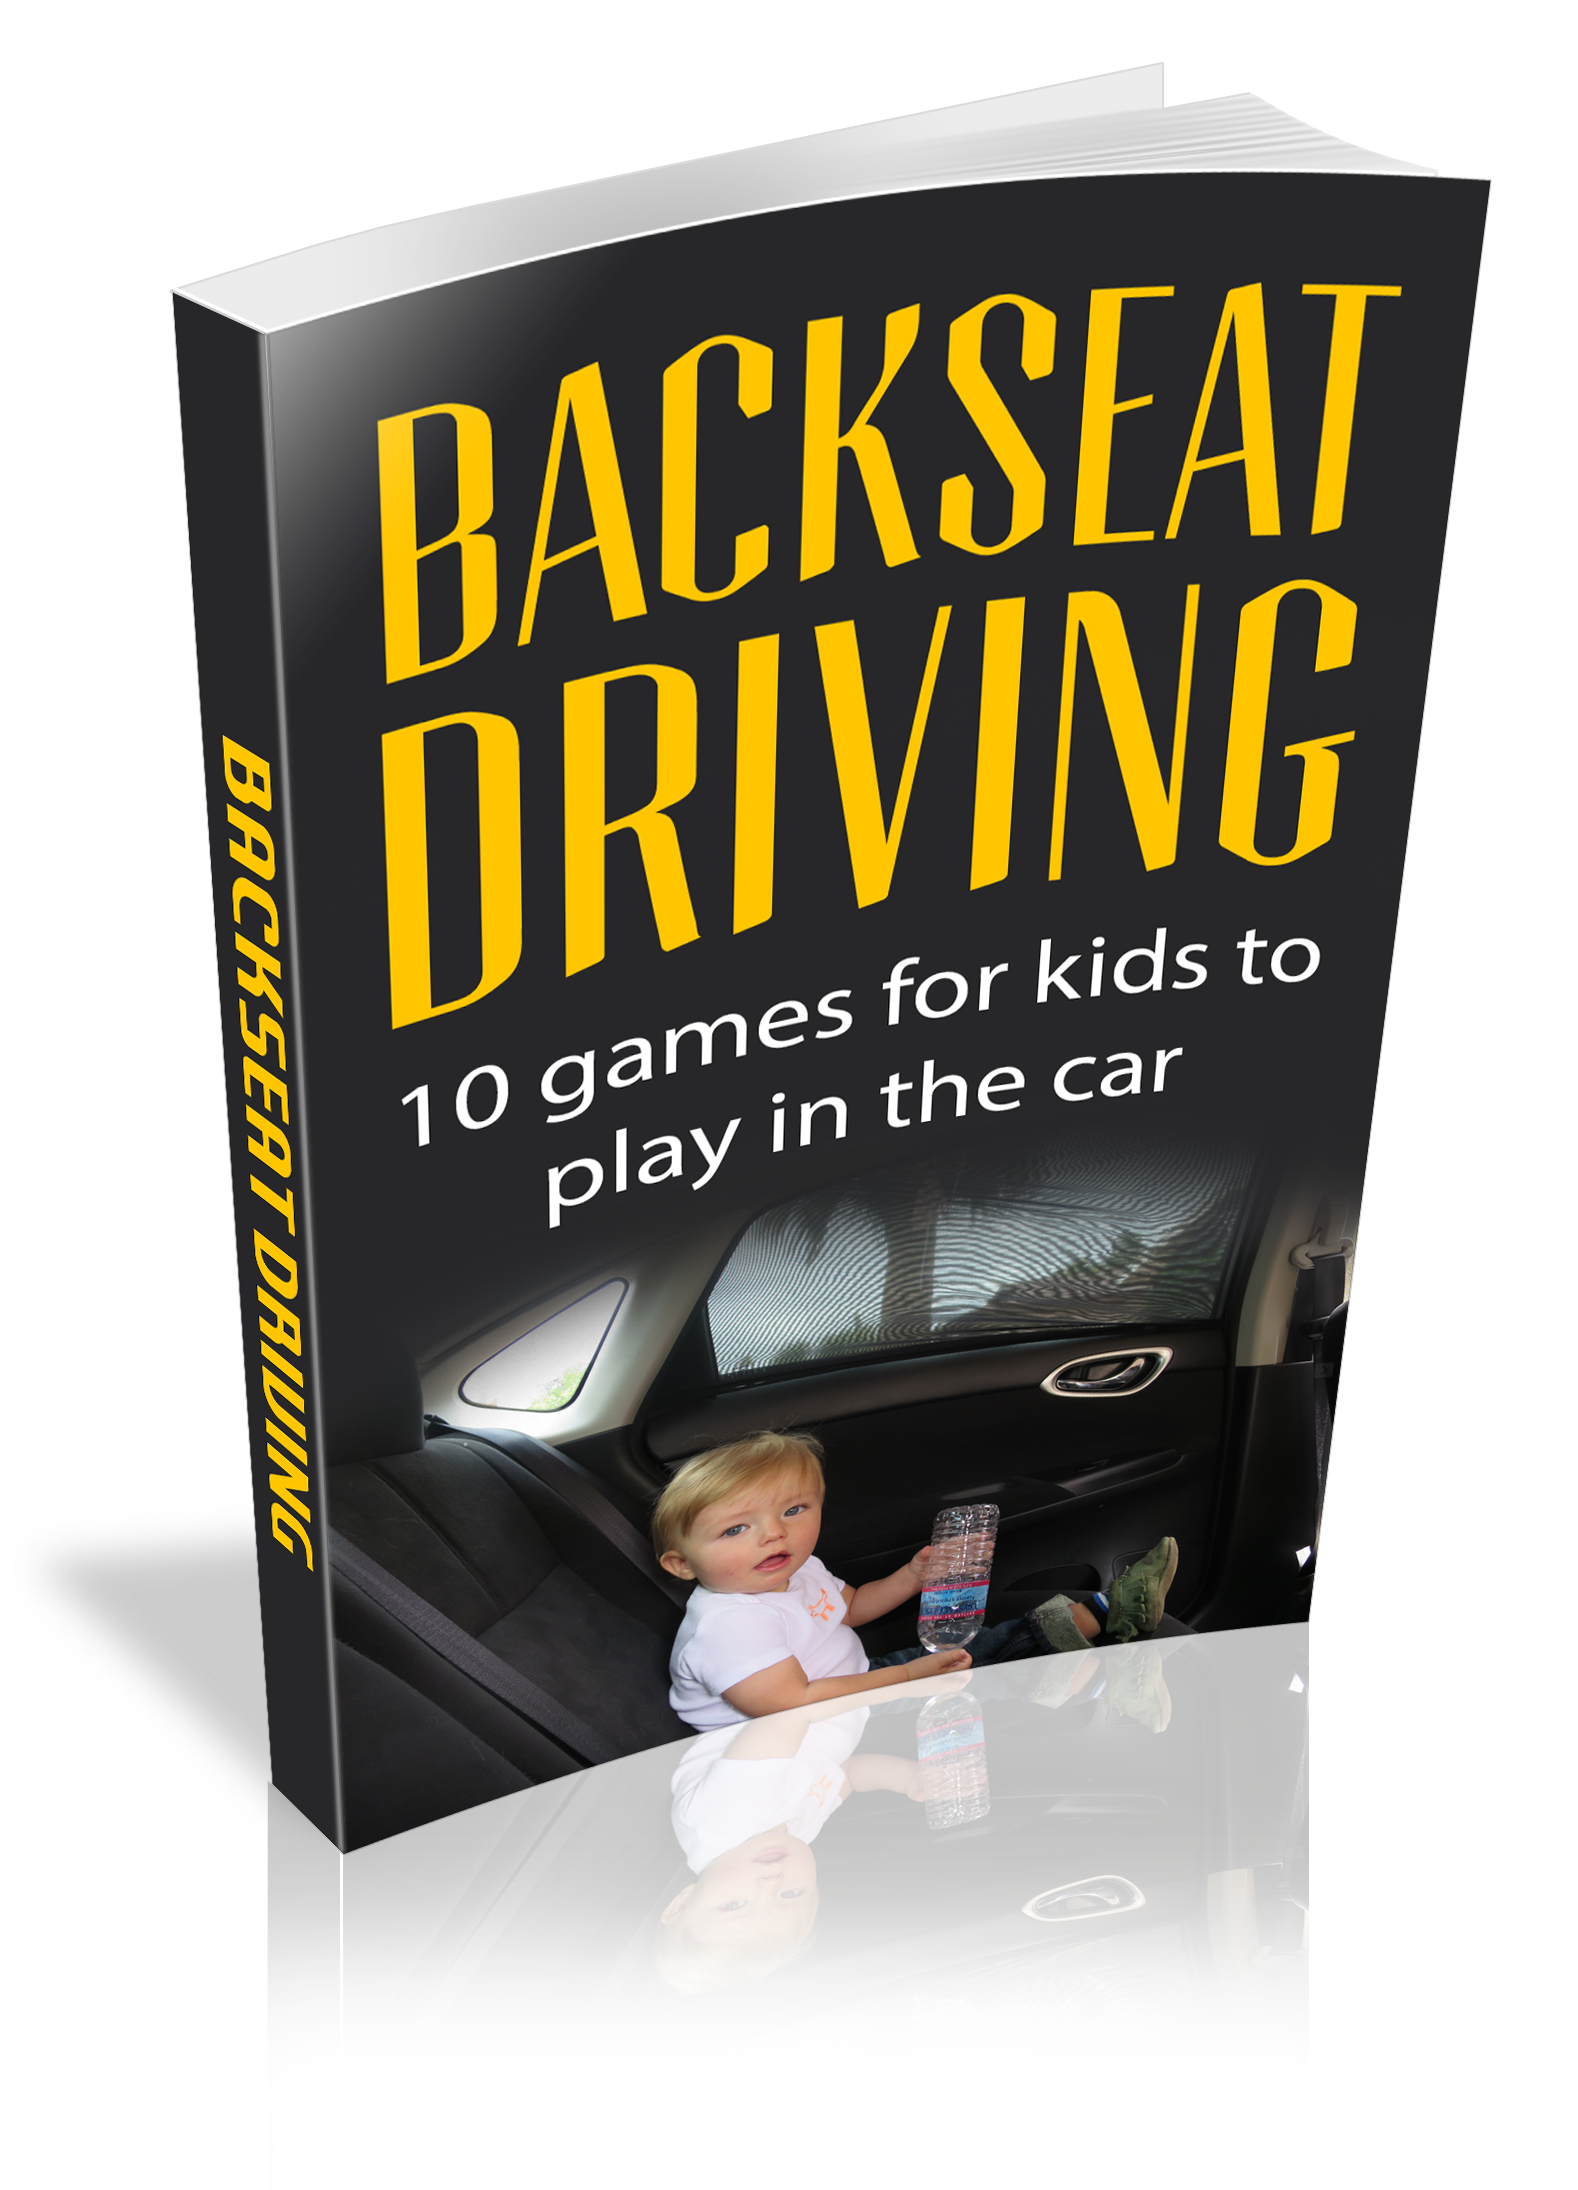 Free eBook Backseat Driving -10 Games for Kids to Play in the Car